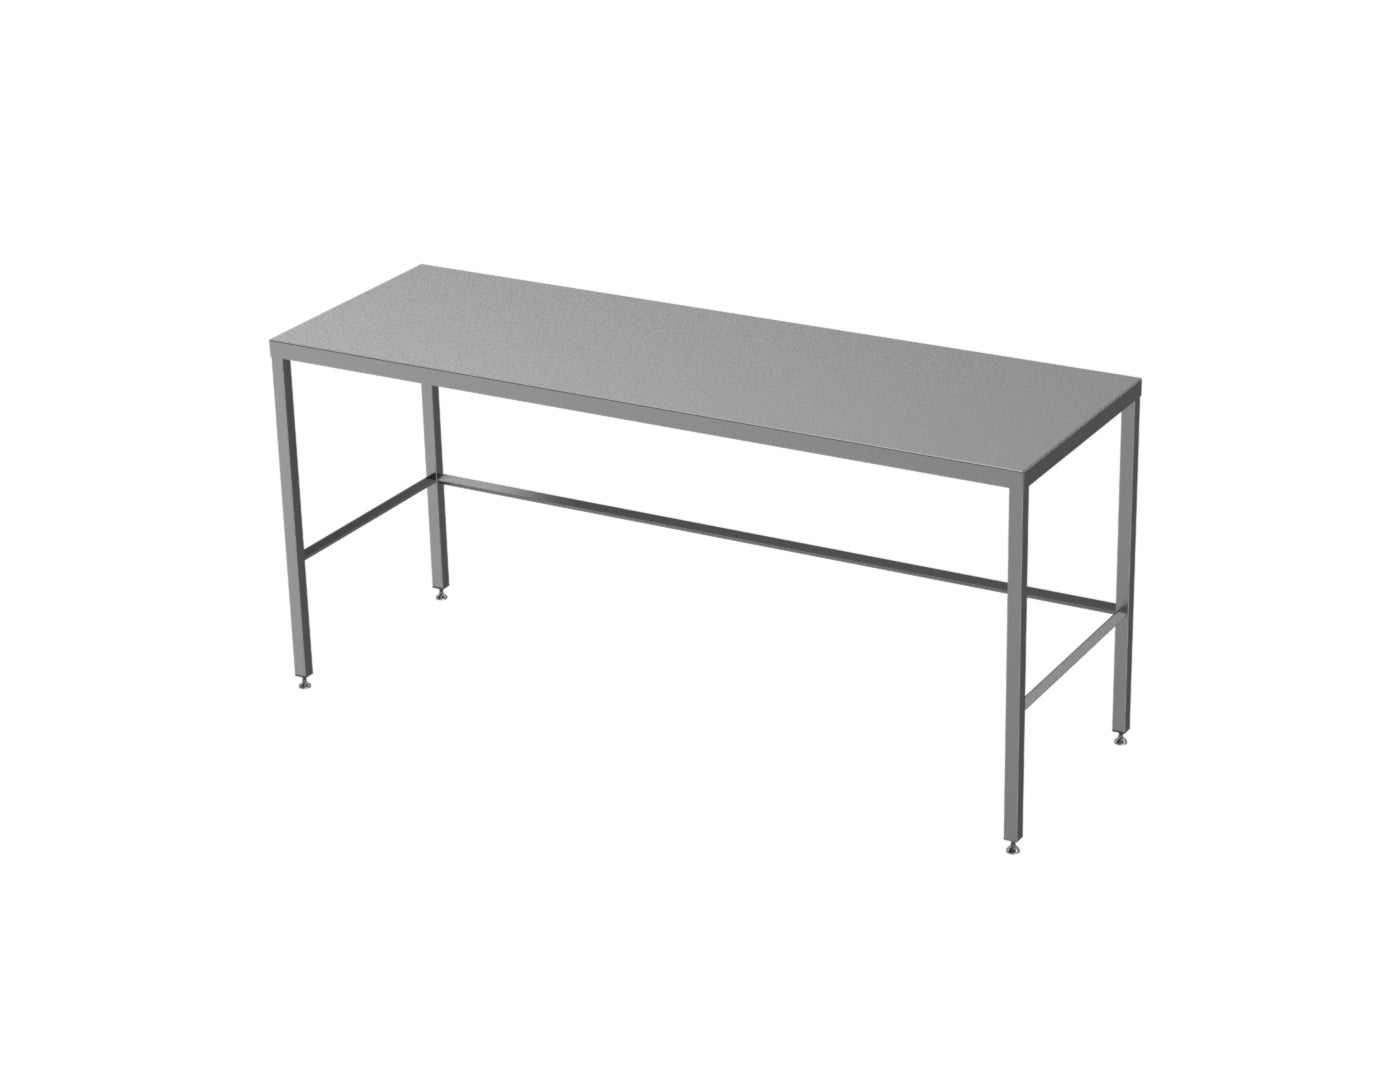 Stainless steel table with diamond rear tie bar